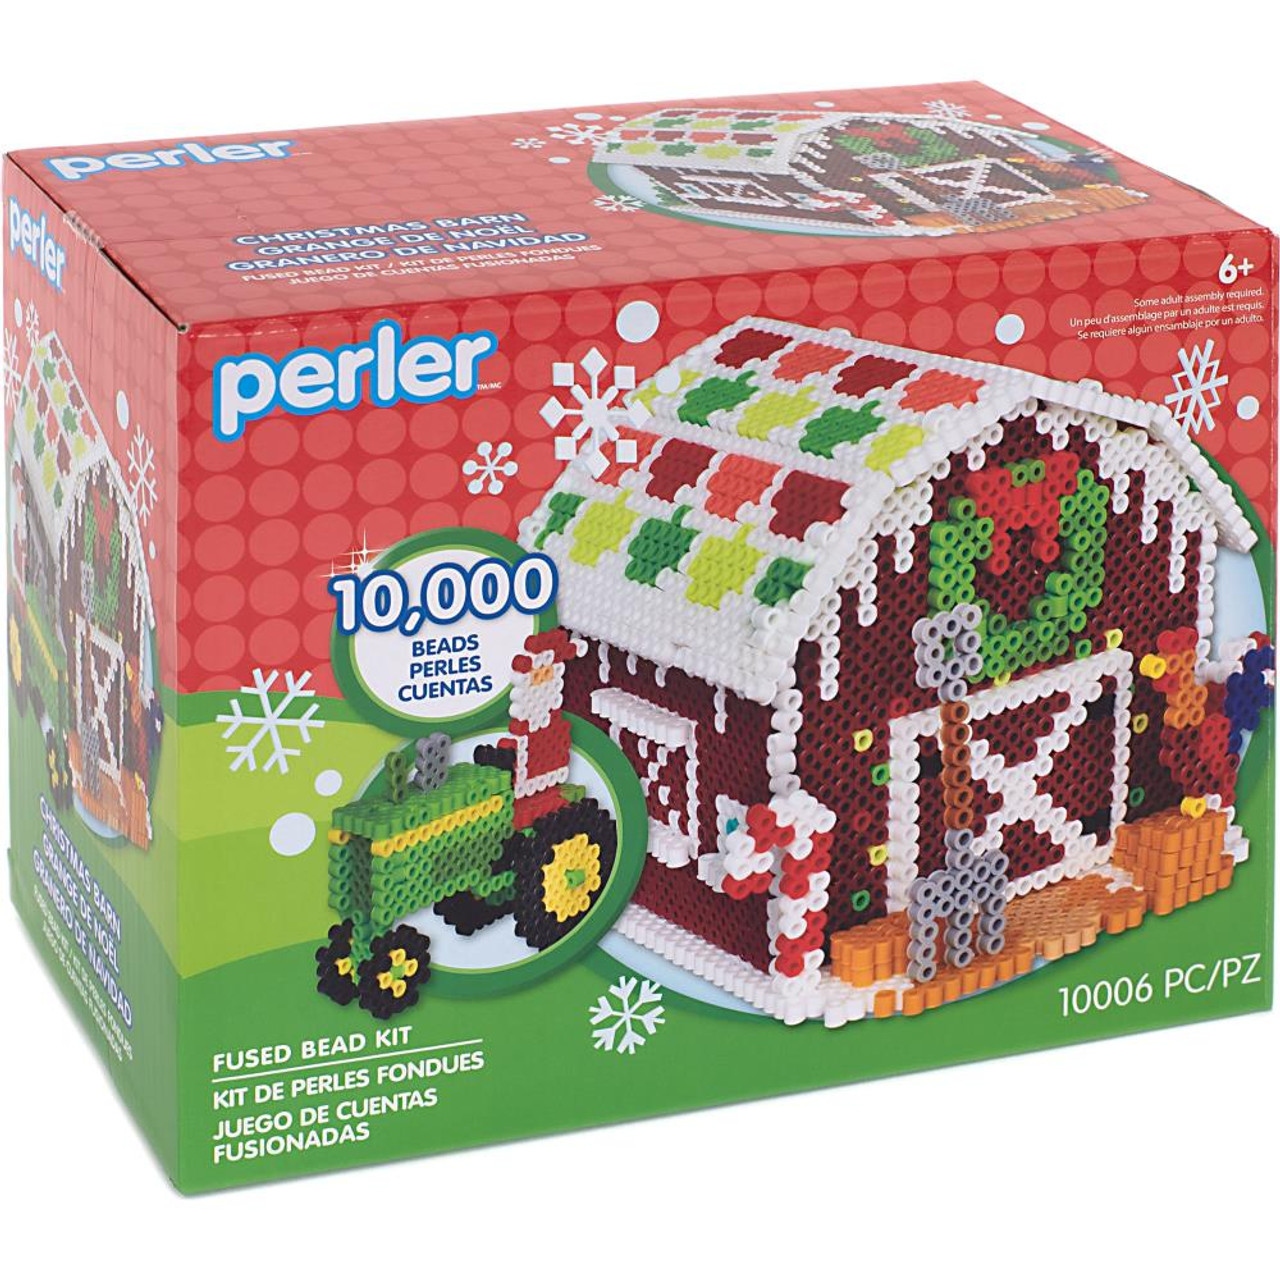 Perler Gingerbread Dog House 3D Christmas Fuse Bead Kit for Kids and Families 10006 Piece